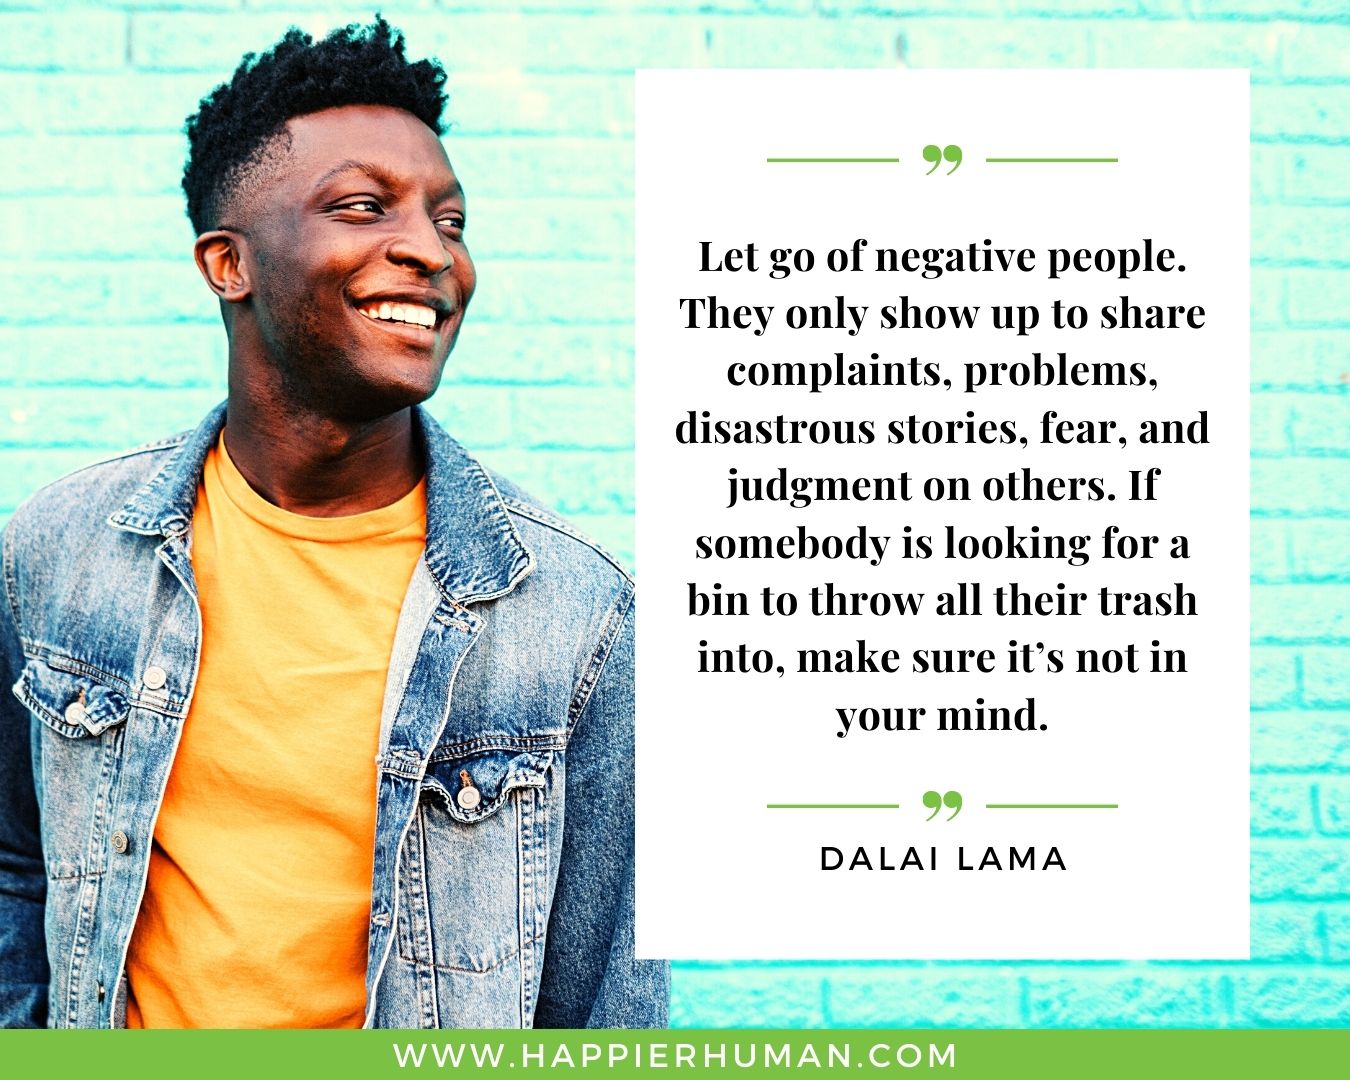 Haters Quotes - “Let go of negative people. They only show up to share complaints, problems, disastrous stories, fear, and judgment on others. If somebody is looking for a bin to throw all their trash into, make sure it’s not in your mind.” - Dalai Lama